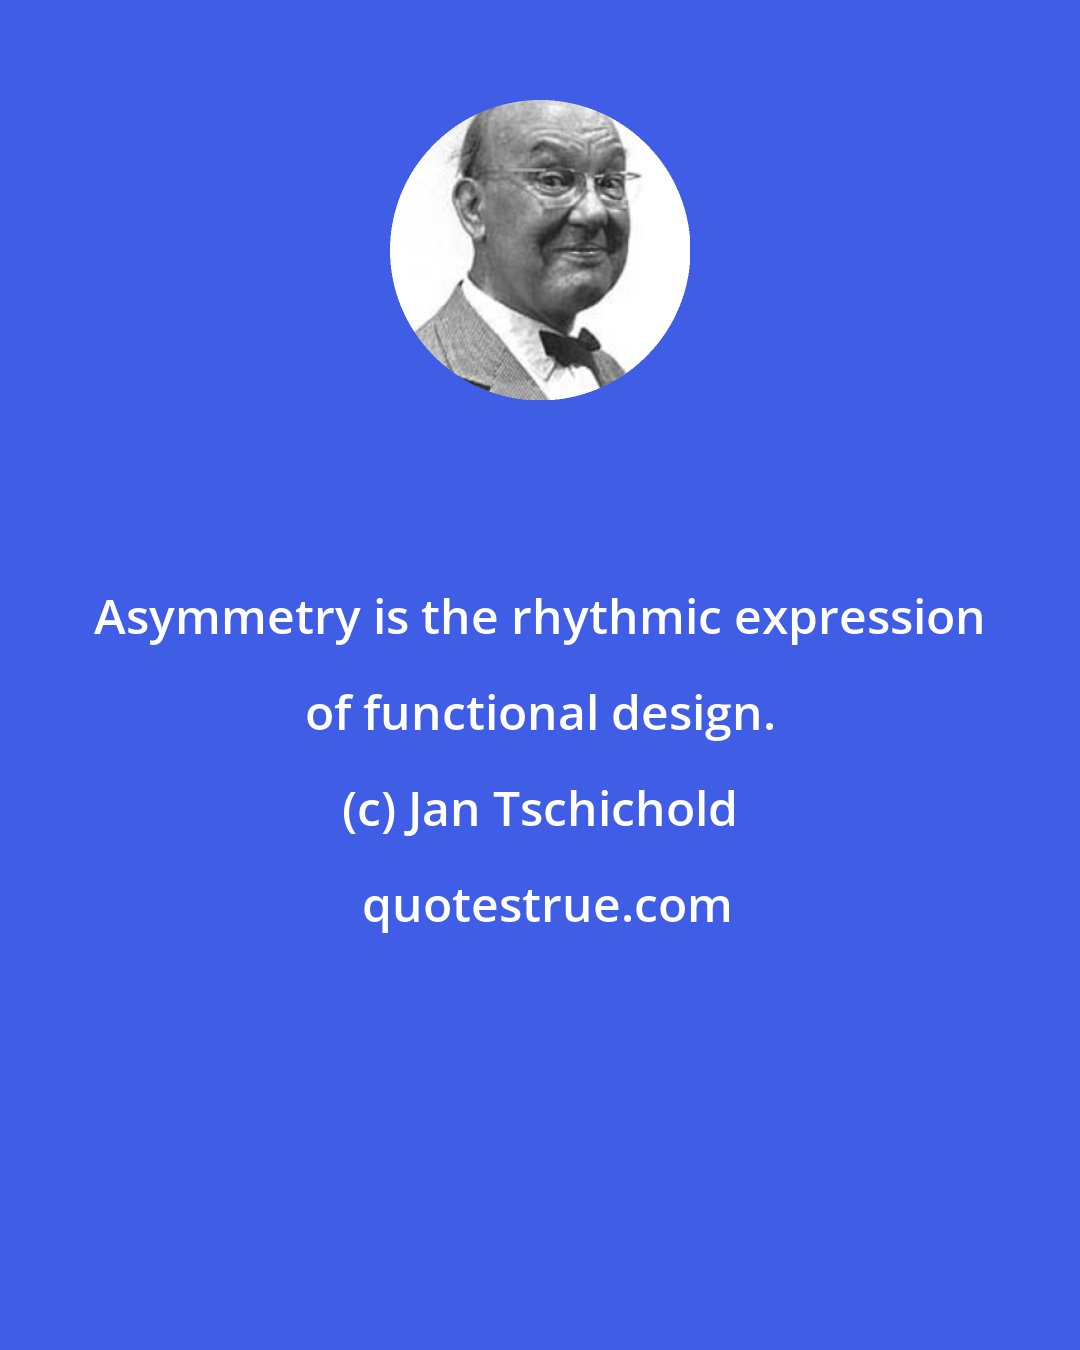 Jan Tschichold: Asymmetry is the rhythmic expression of functional design.